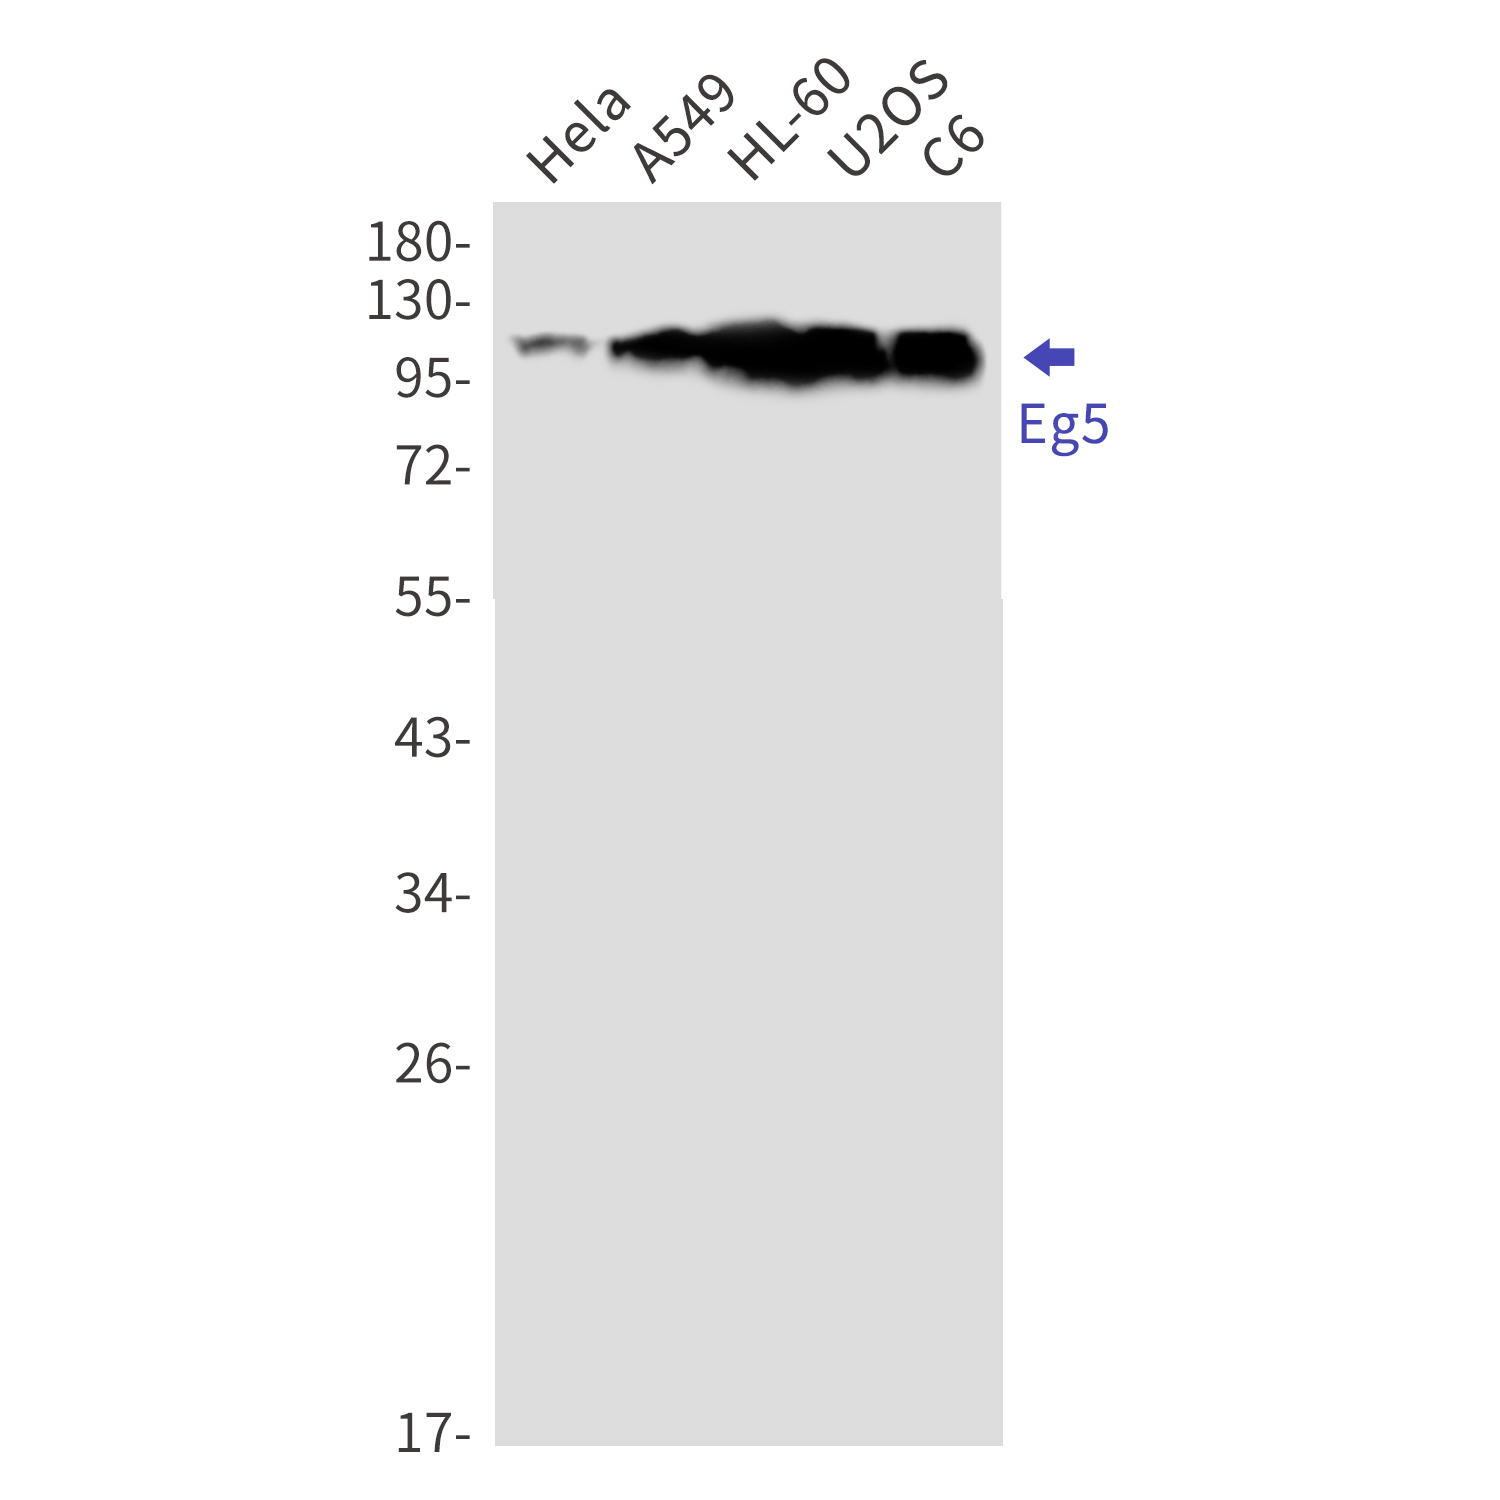 Western blot detection of  Eg5 in Hela,A549,HL-60,U2OS,C6 cell lysates using Eg5 Rabbit mAb(1:1000 diluted).Predicted band size:119kDa.Observed band size:119kDa.